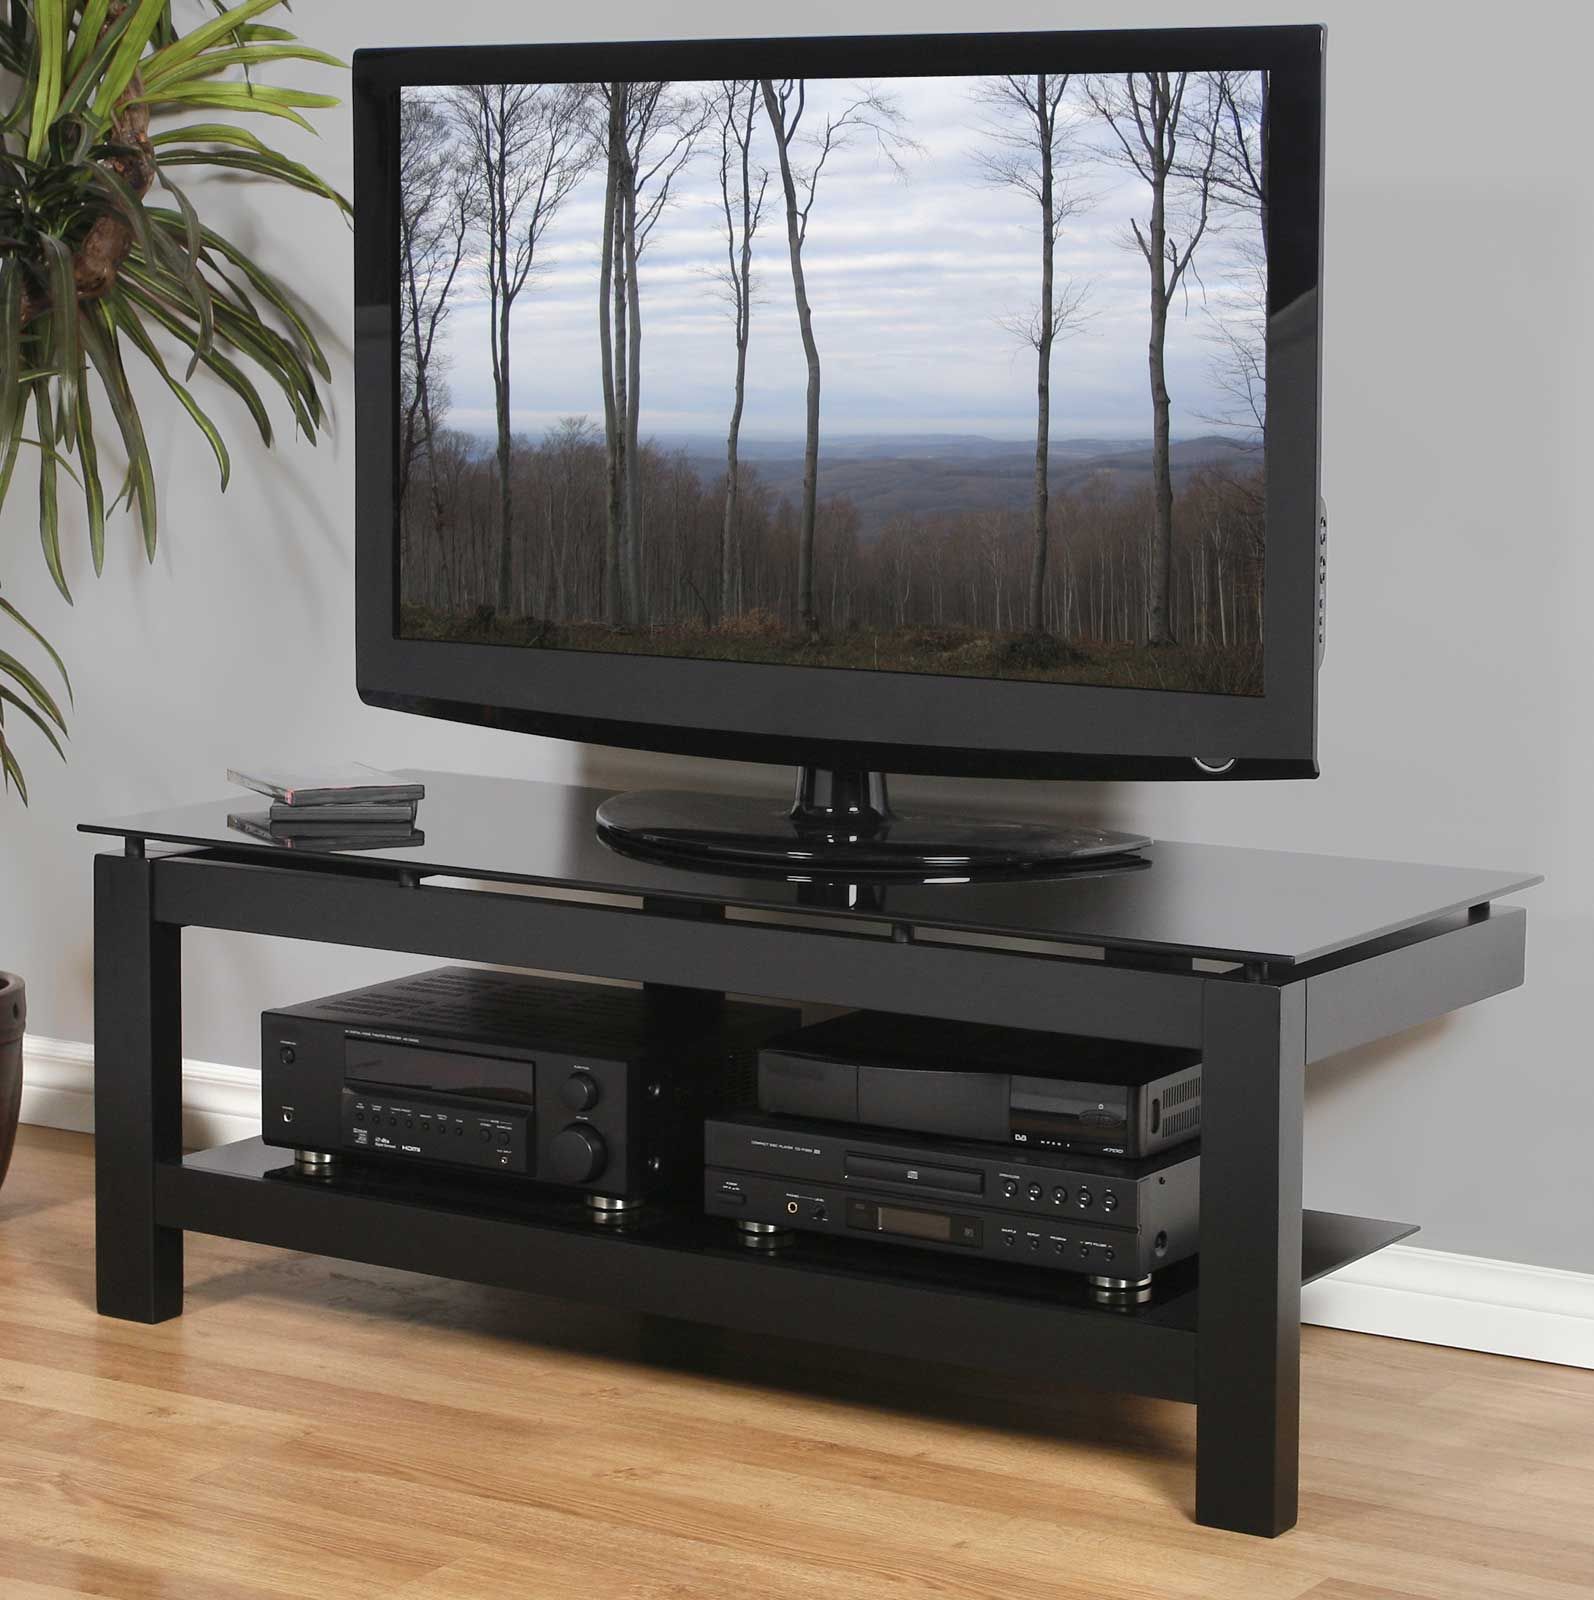 Low Profile 50 Inch Tv Stand – Black In Tv Stands With Regard To Modern Low Tv Stands (View 10 of 15)